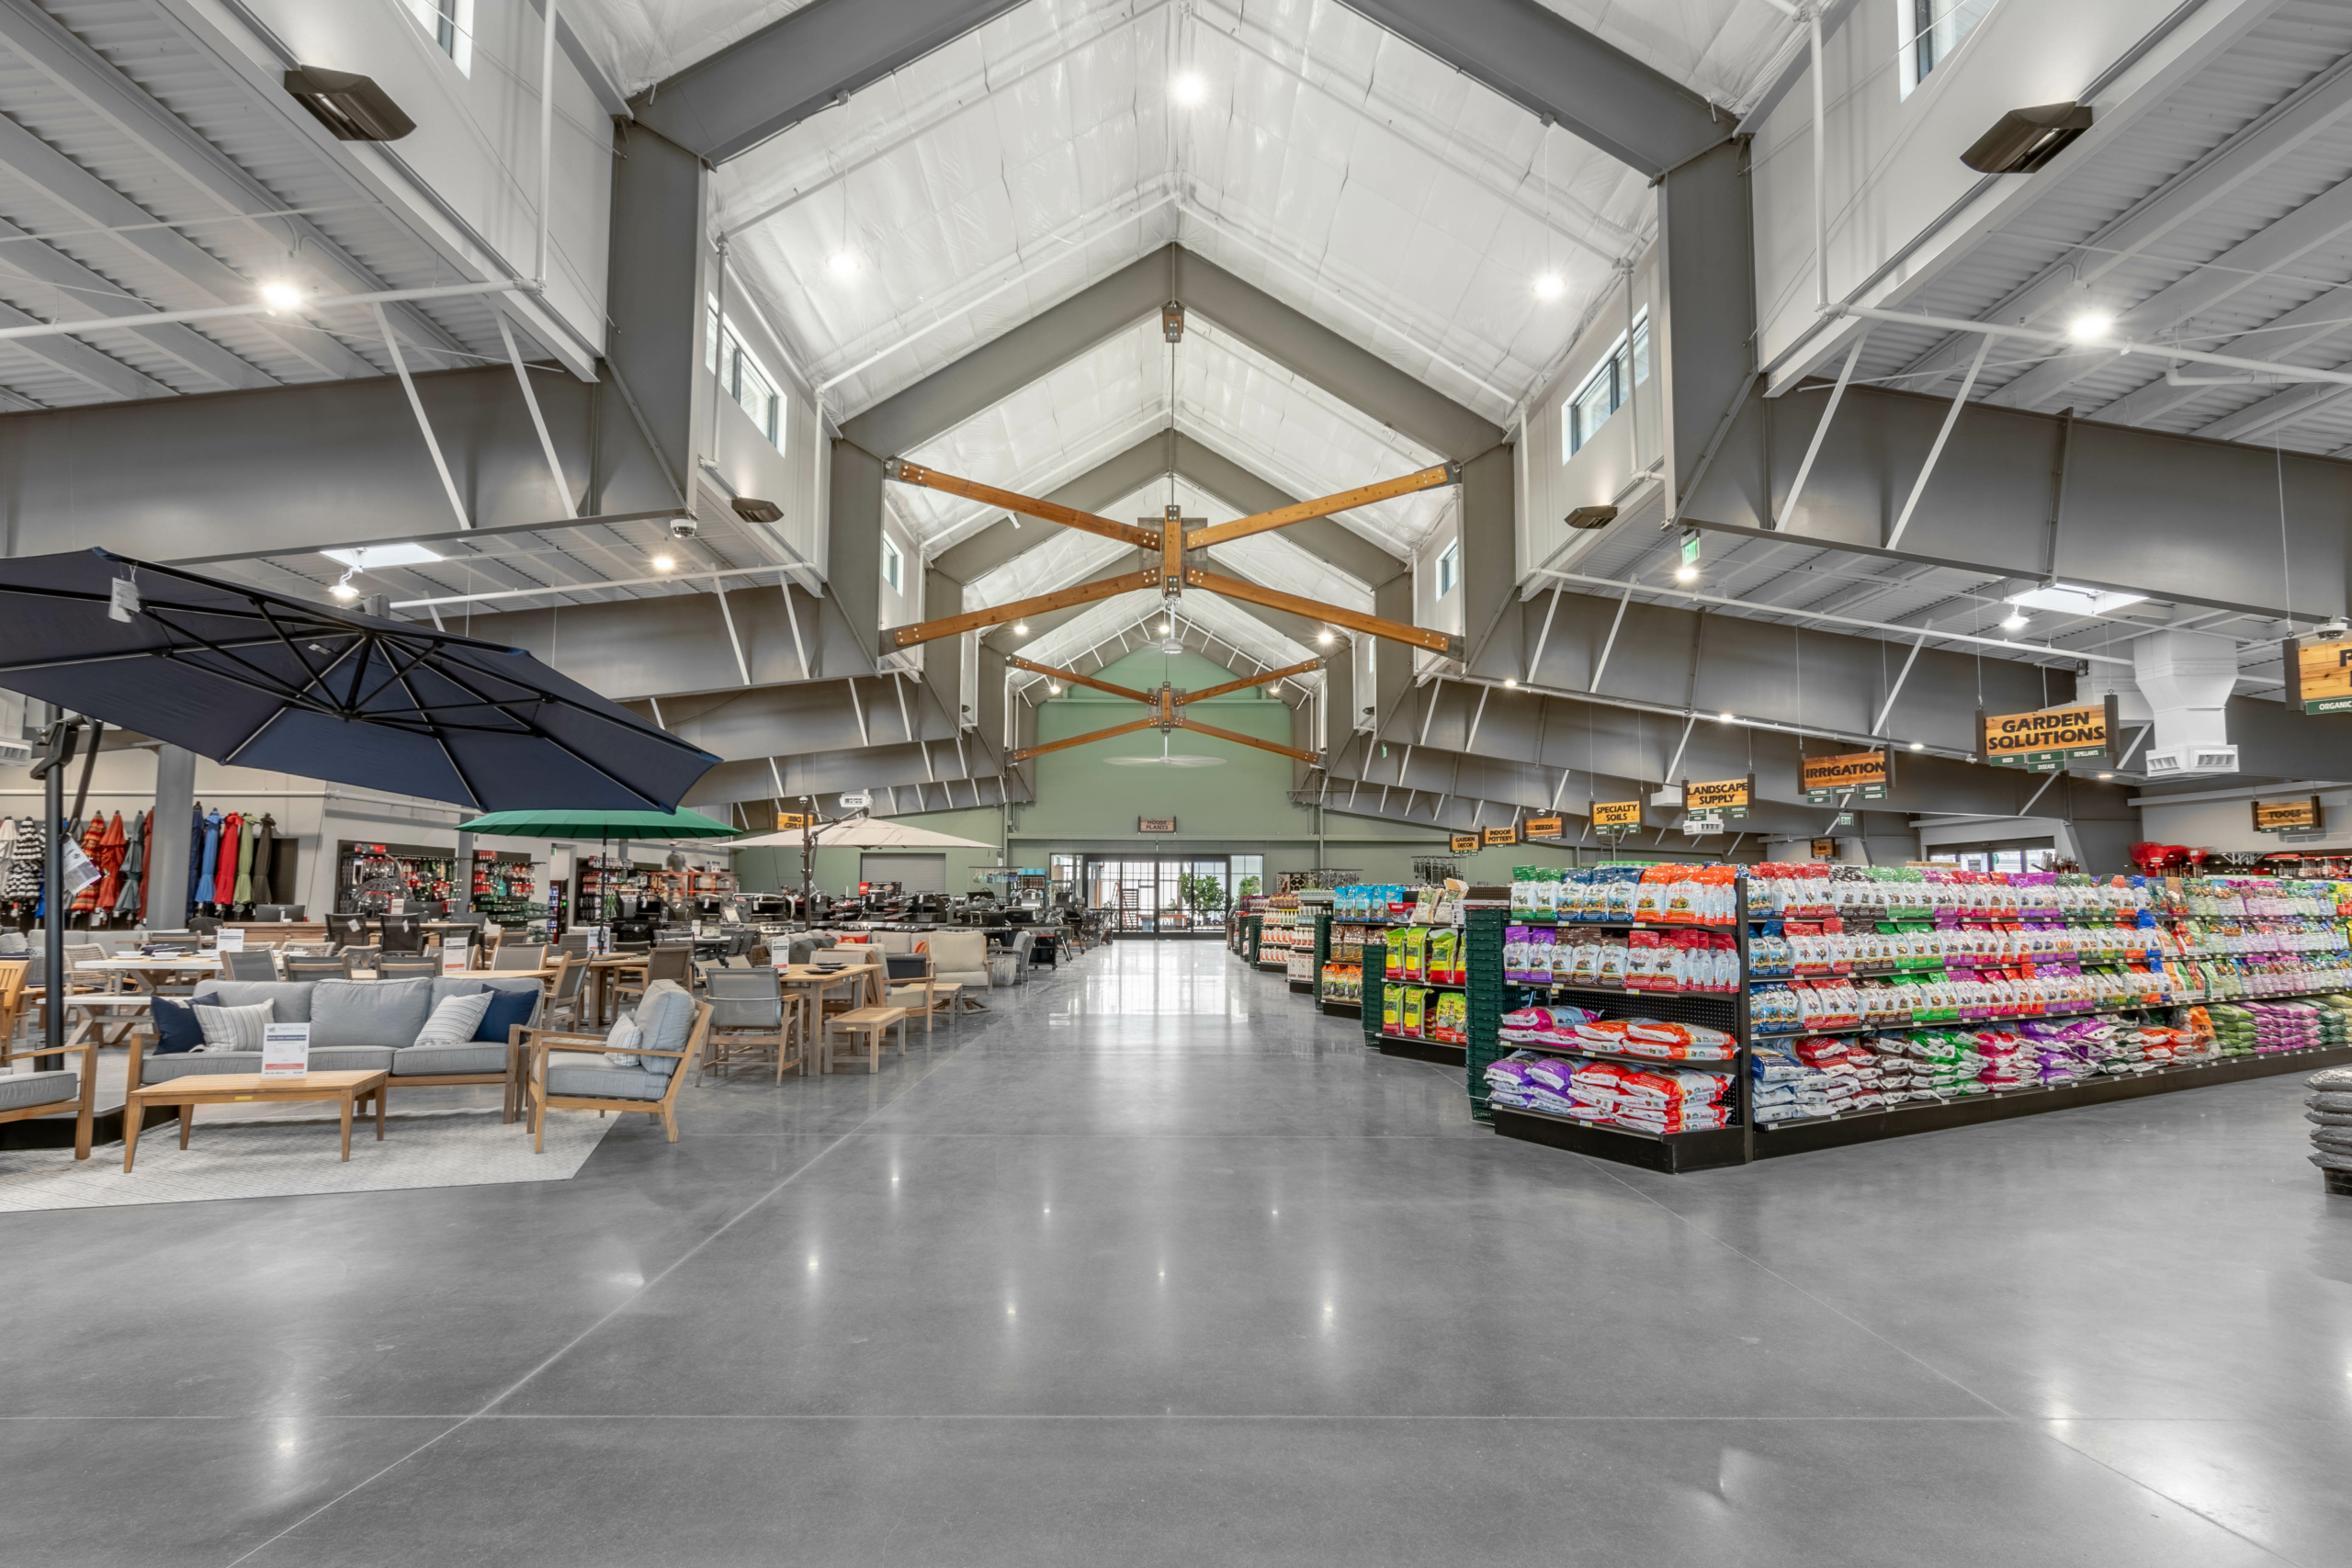 A spacious, well-lit store interior featuring outdoor furniture on the left and shelves stocked with various colorful products on the right. High ceilings and exposed beams are visible.